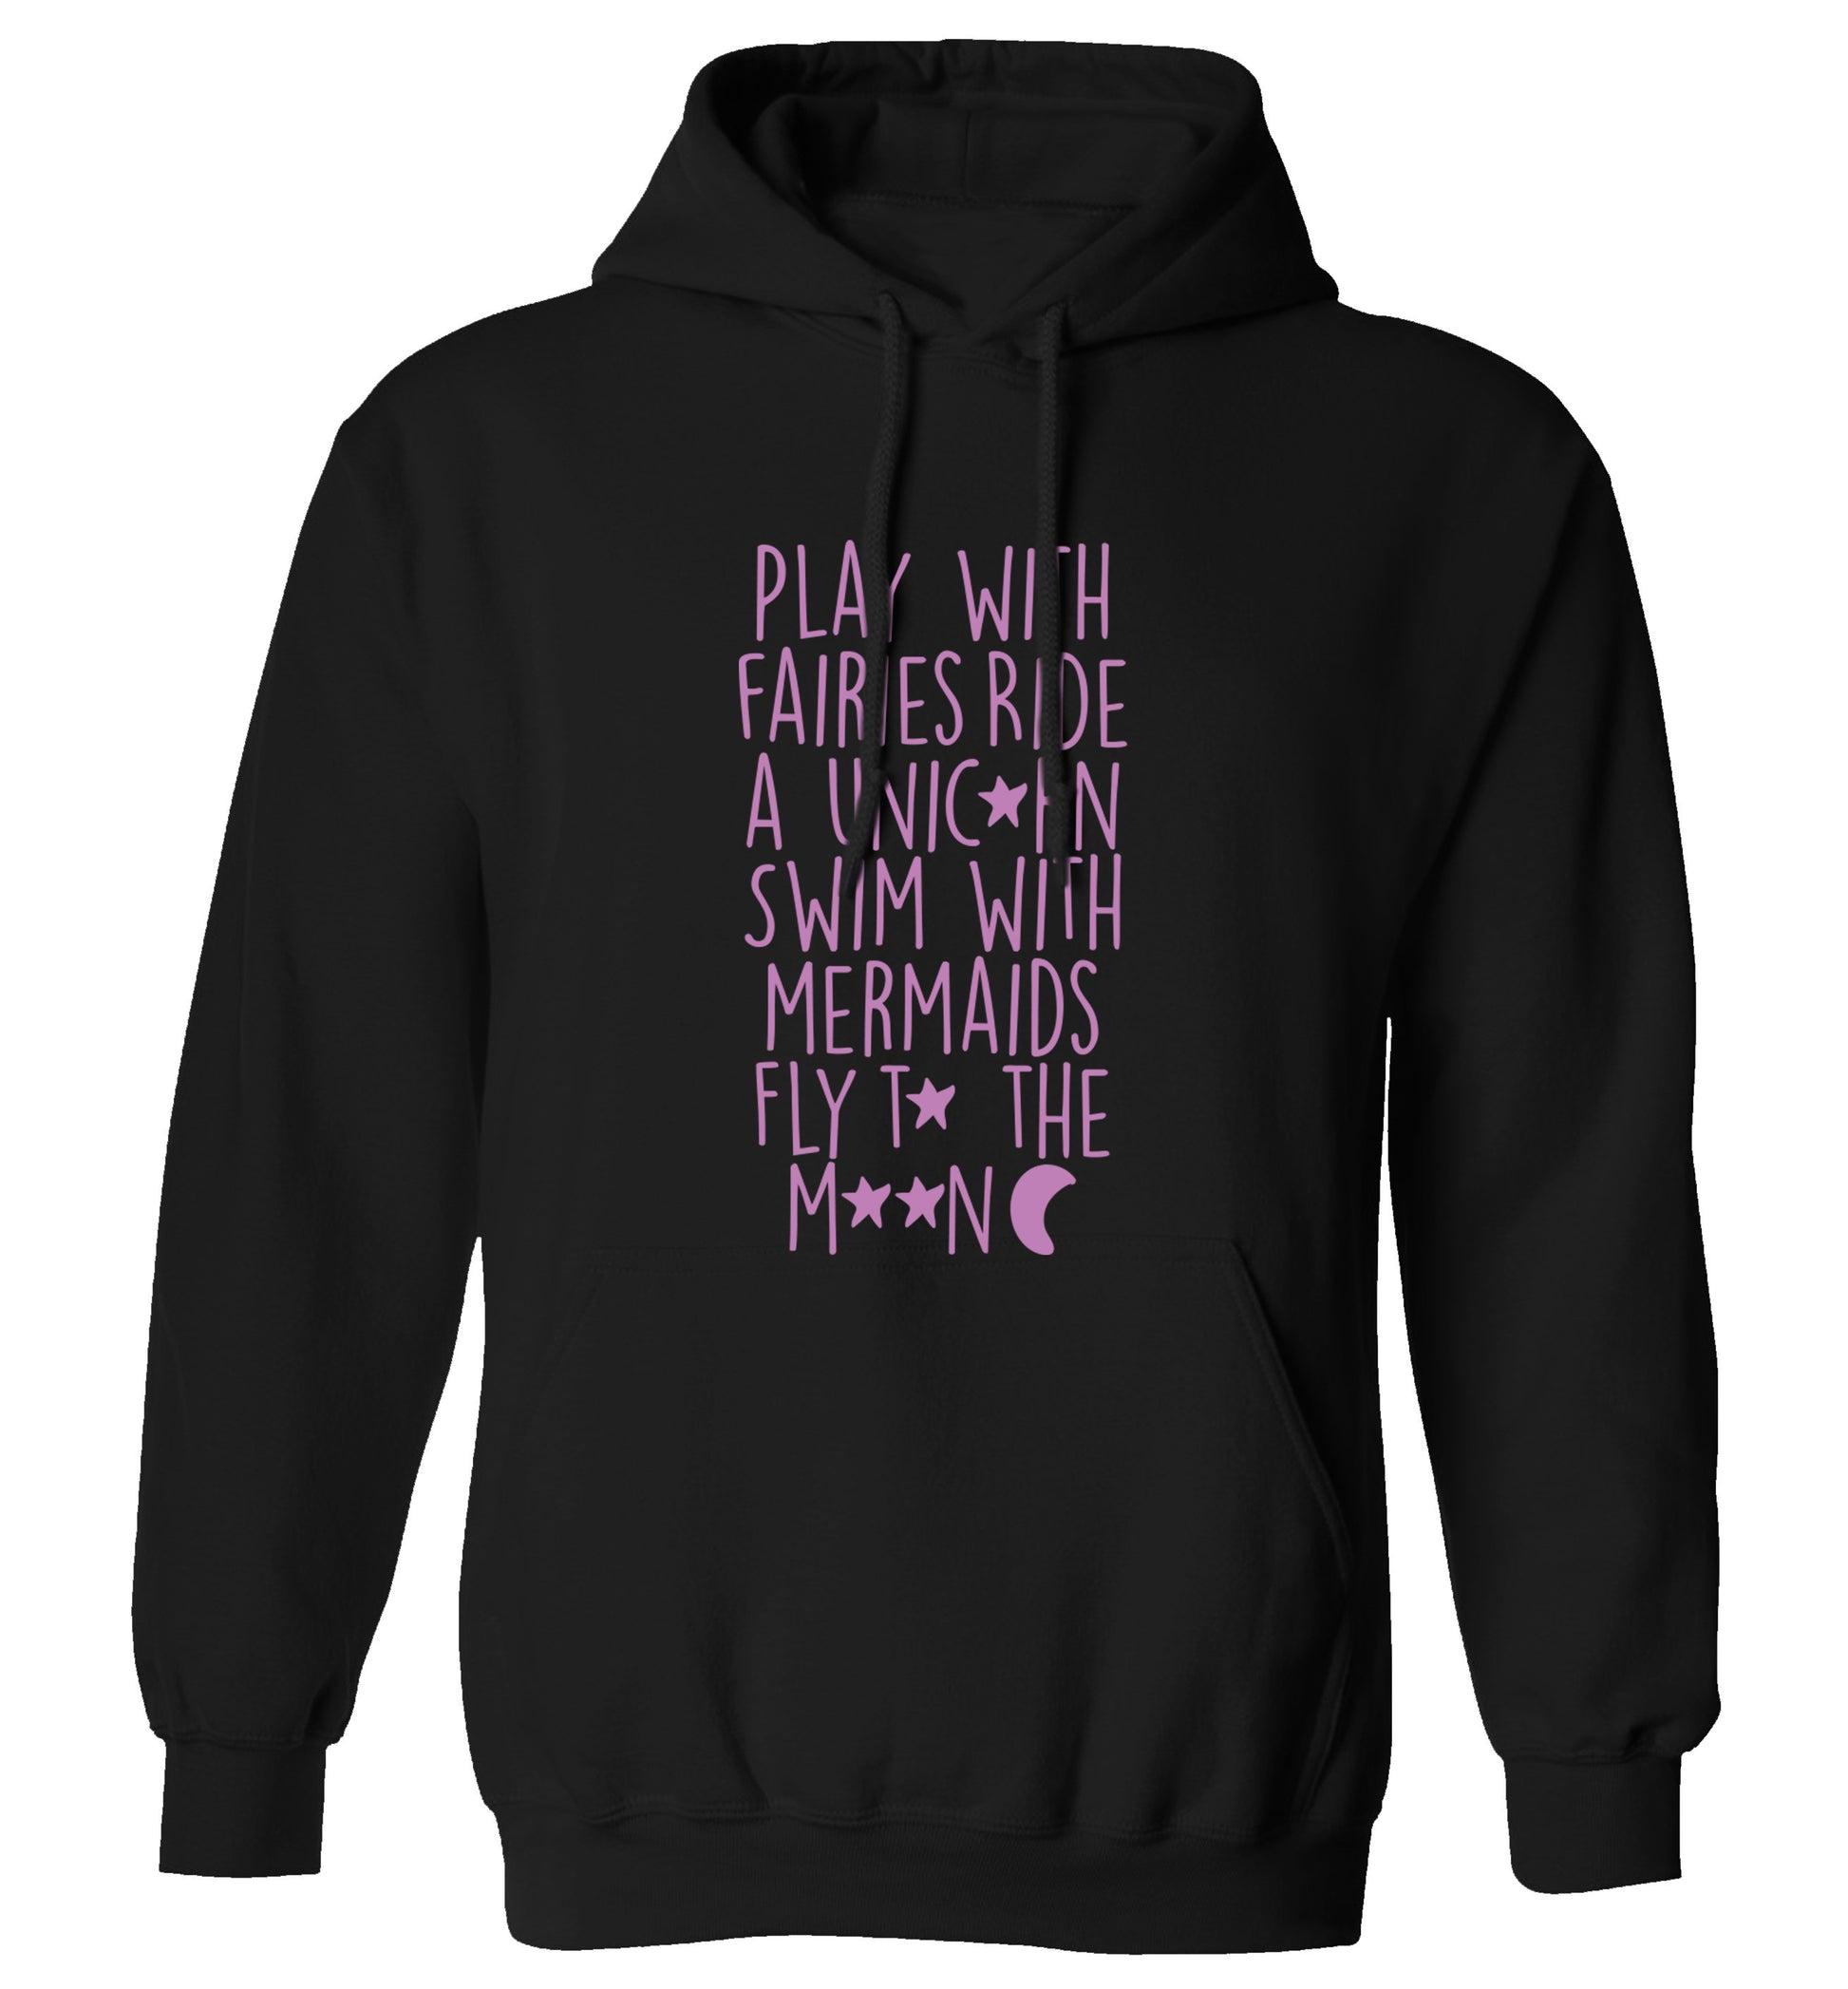 Play with fairies ride a unicorn swim with mermaids fly to the moon adults unisex black hoodie 2XL